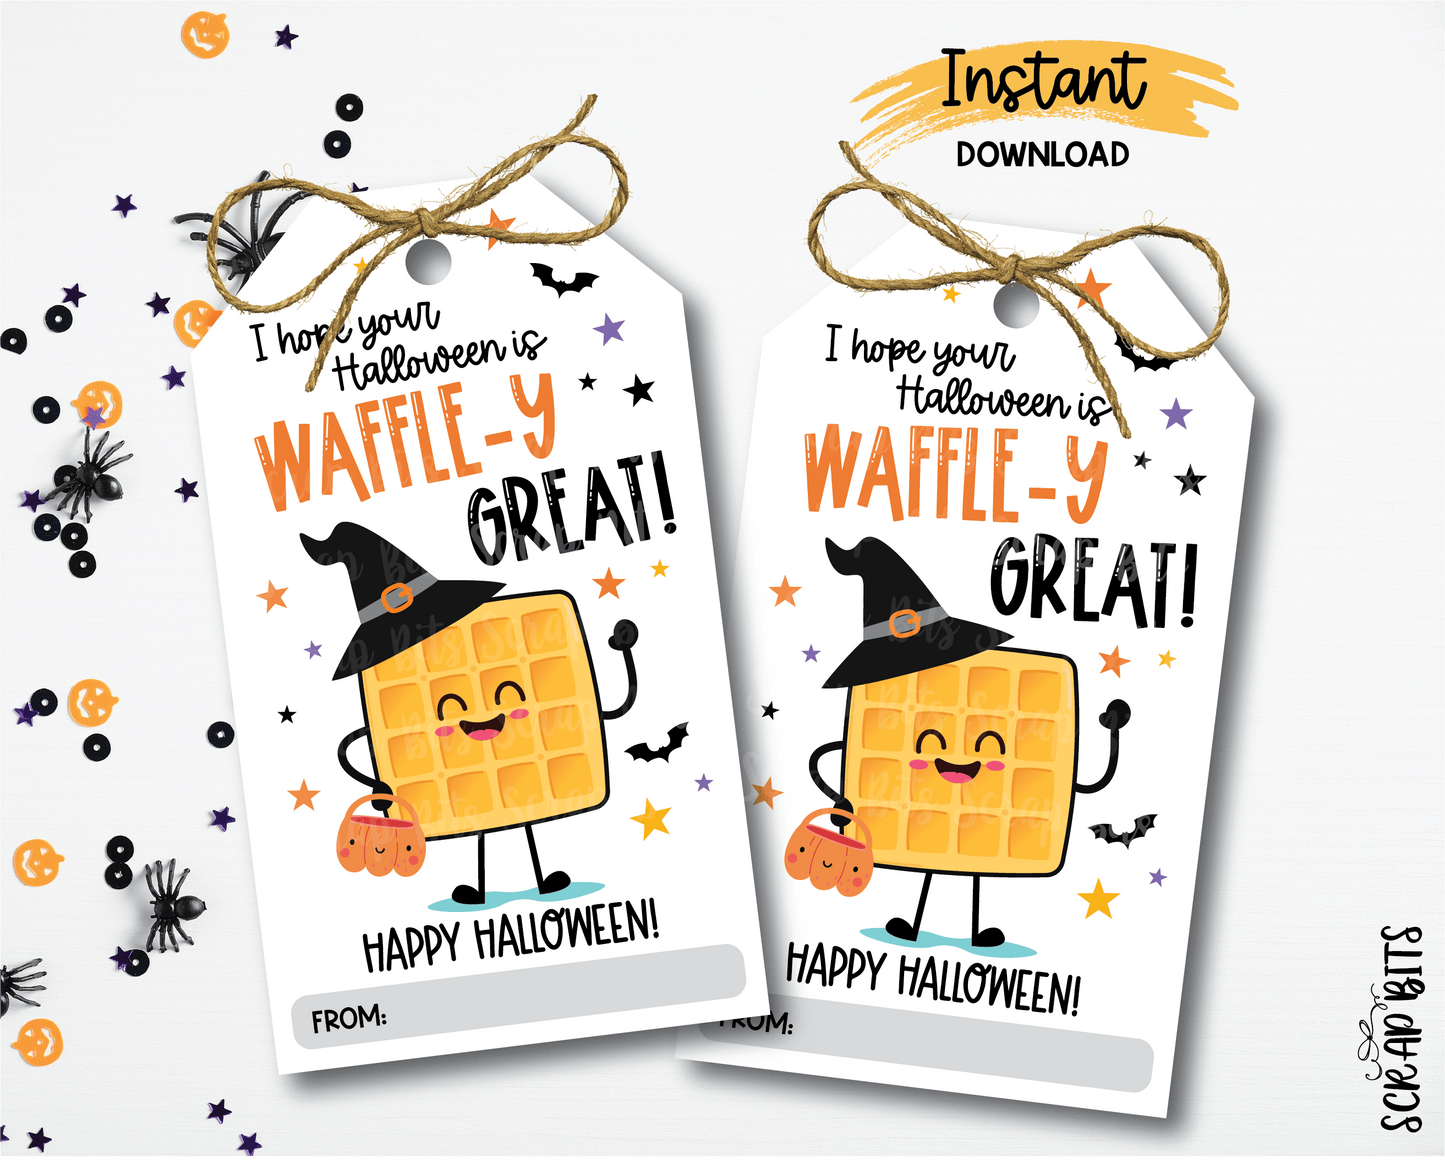 Halloween Waffle Tags, Hope Your Halloween Is Waffle-y Great, Printable Halloween Tags, Instant Download - Scrap Bits